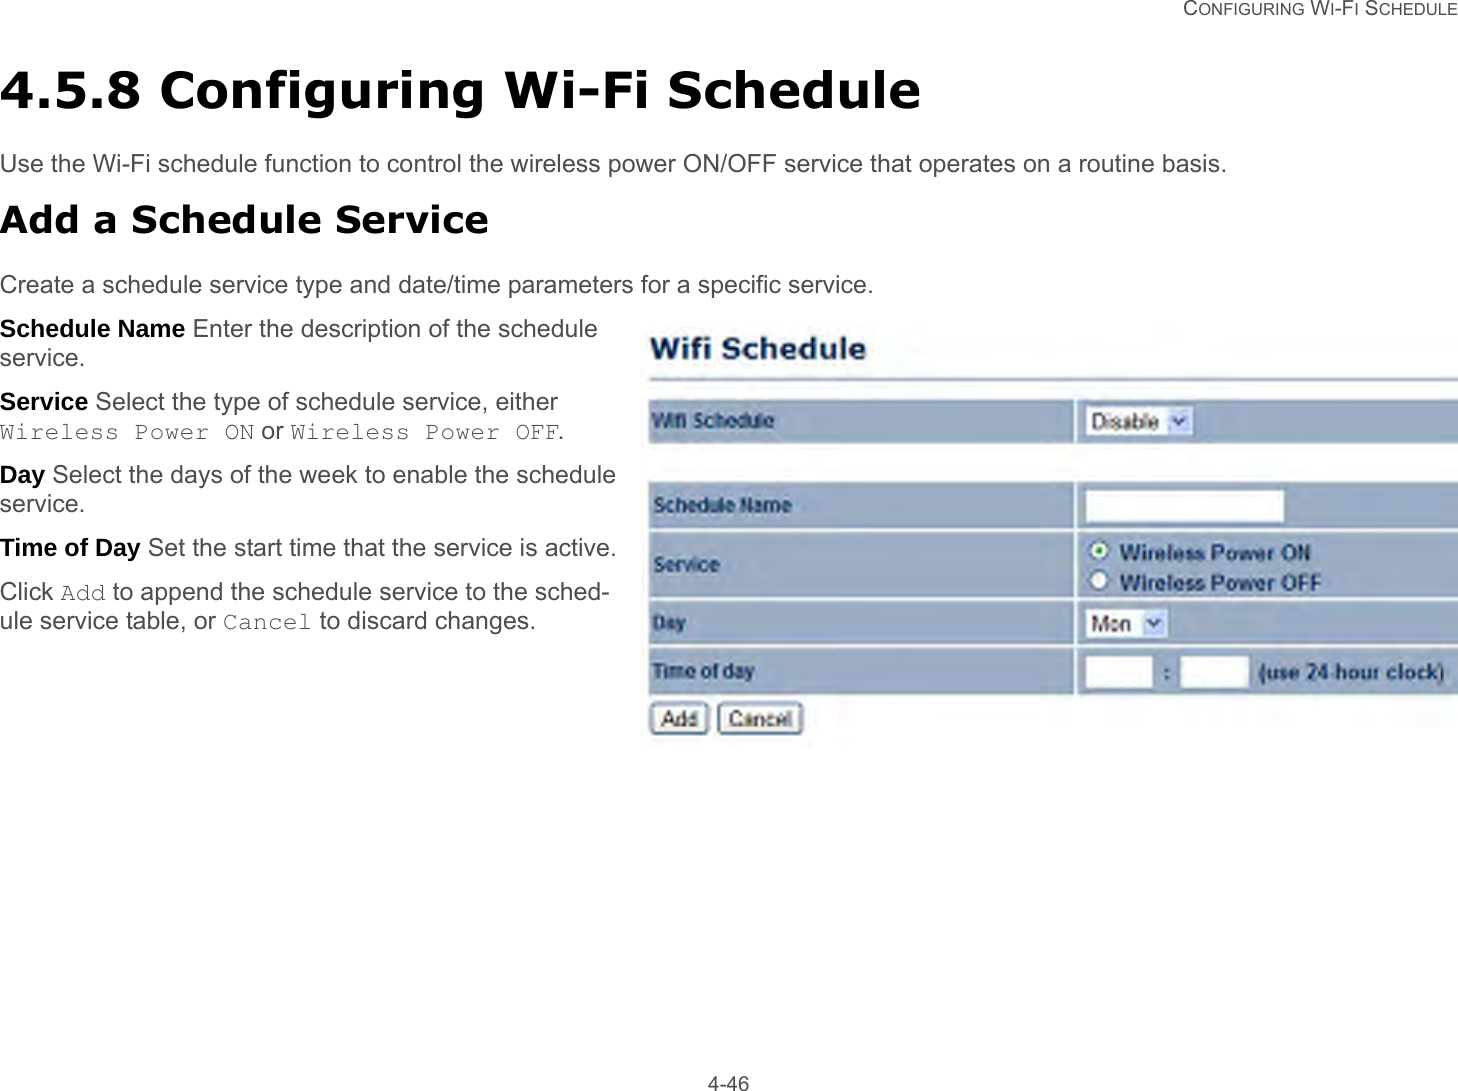   CONFIGURING WI-FI SCHEDULE 4-464.5.8 Configuring Wi-Fi ScheduleUse the Wi-Fi schedule function to control the wireless power ON/OFF service that operates on a routine basis.Add a Schedule ServiceCreate a schedule service type and date/time parameters for a specific service.Schedule Name Enter the description of the schedule service.Service Select the type of schedule service, either Wireless Power ON or Wireless Power OFF.Day Select the days of the week to enable the schedule service.Time of Day Set the start time that the service is active.Click Add to append the schedule service to the sched-ule service table, or Cancel to discard changes.